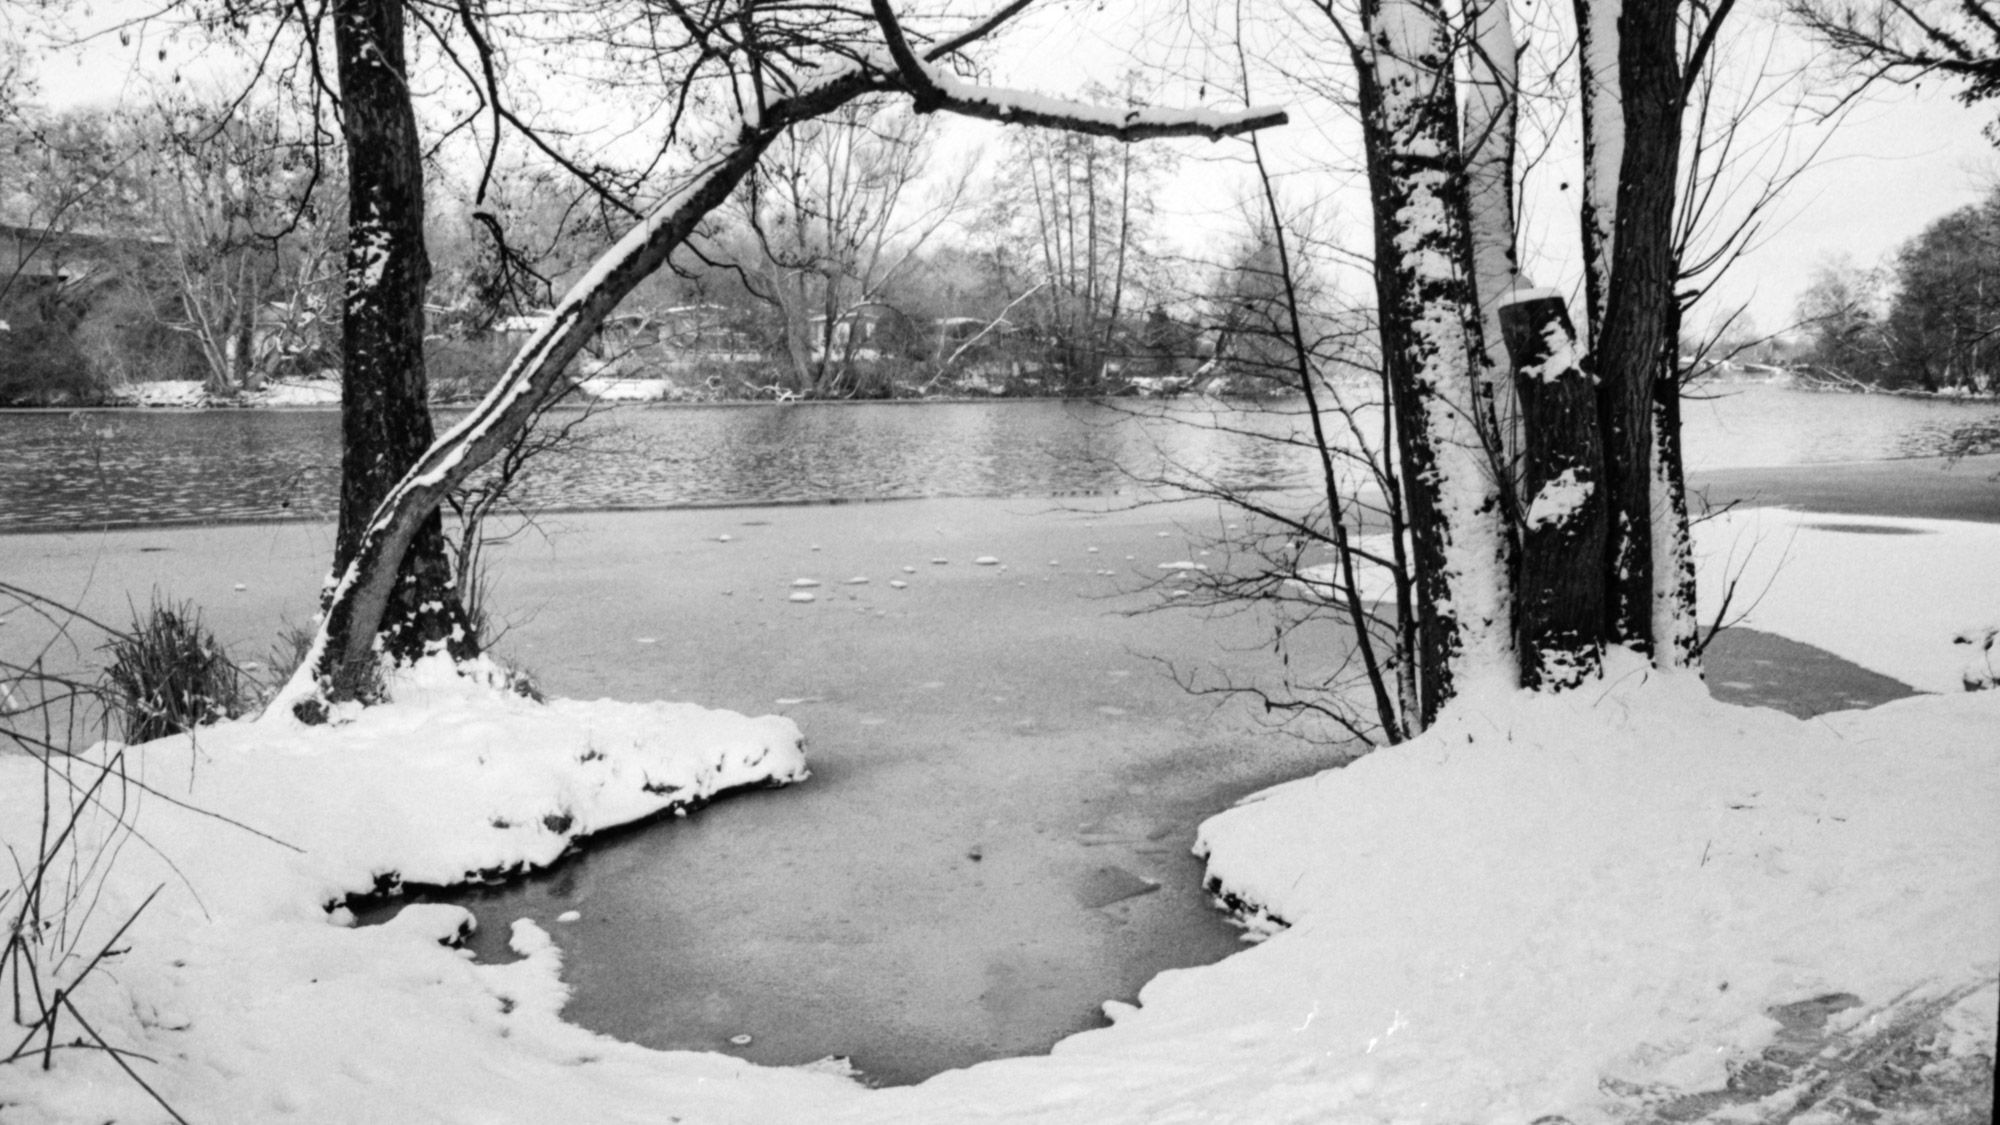 Winter impressions in the snow by the river. Black and white picture taken on Kodak Tri-X 400 film.